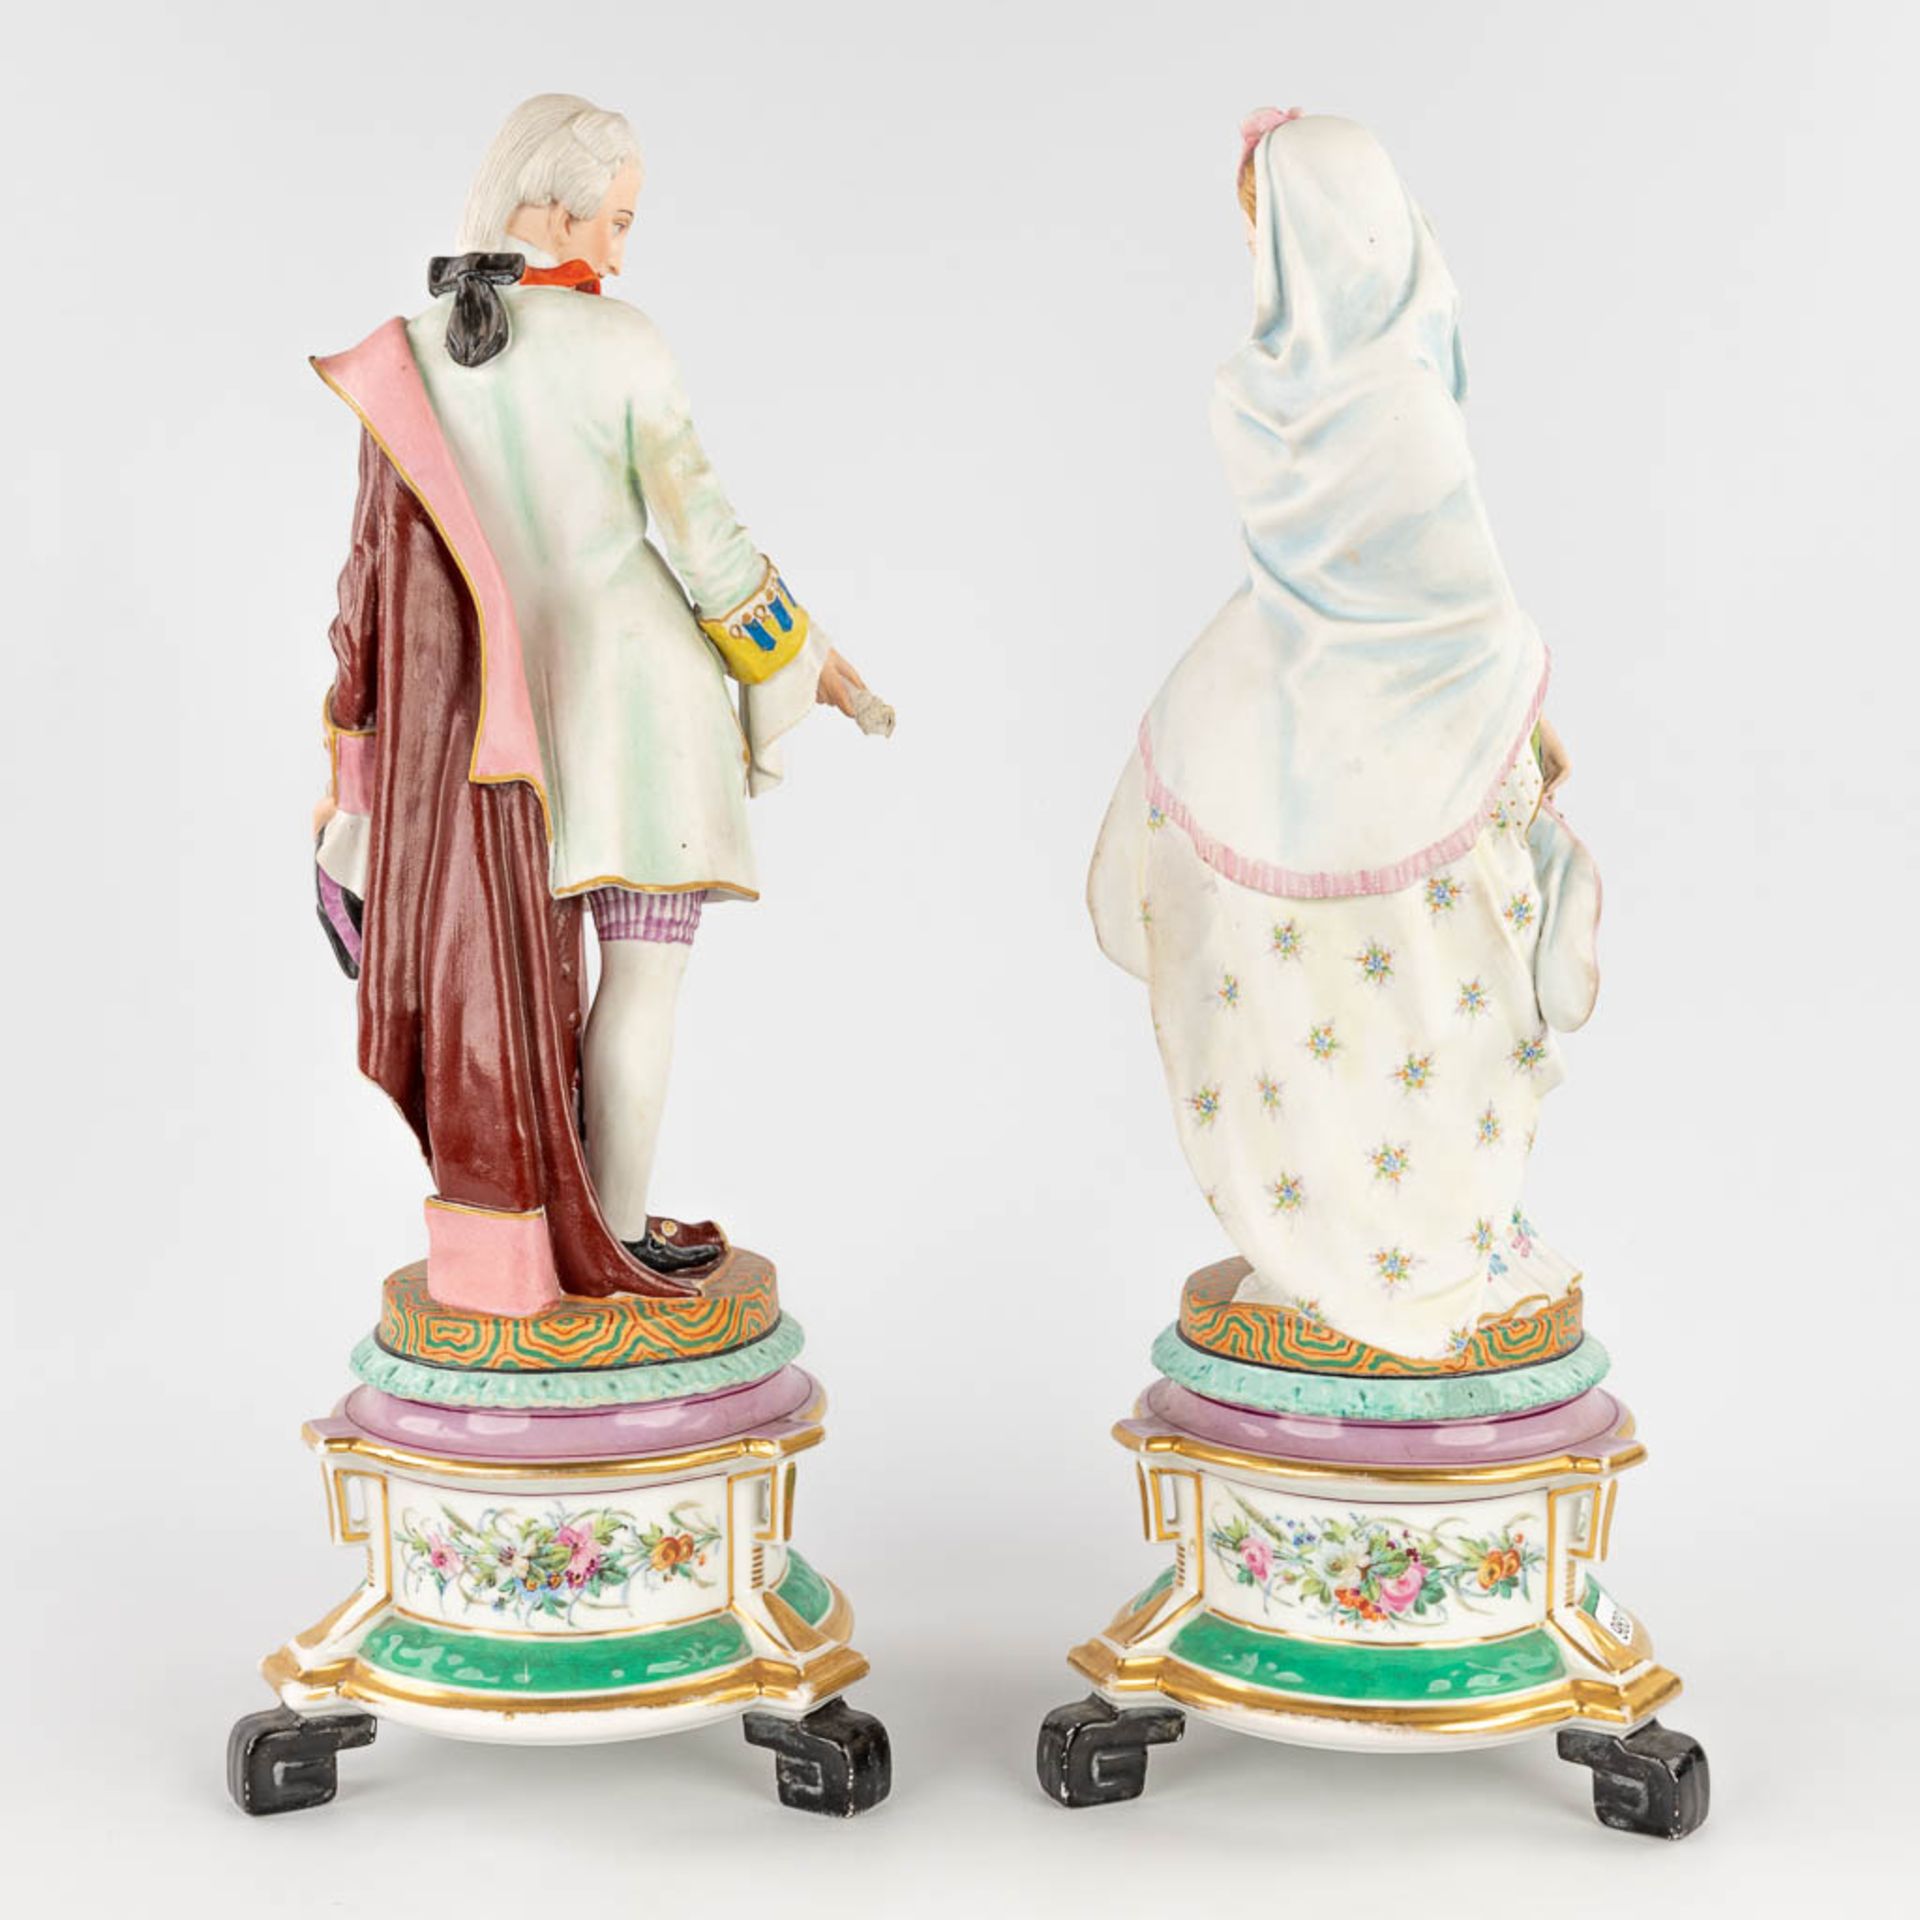 A pair of antique bisque figurines, standing on a glazed porcelain base. (L: 18 x W: 18 x H: 49 cm) - Image 4 of 24